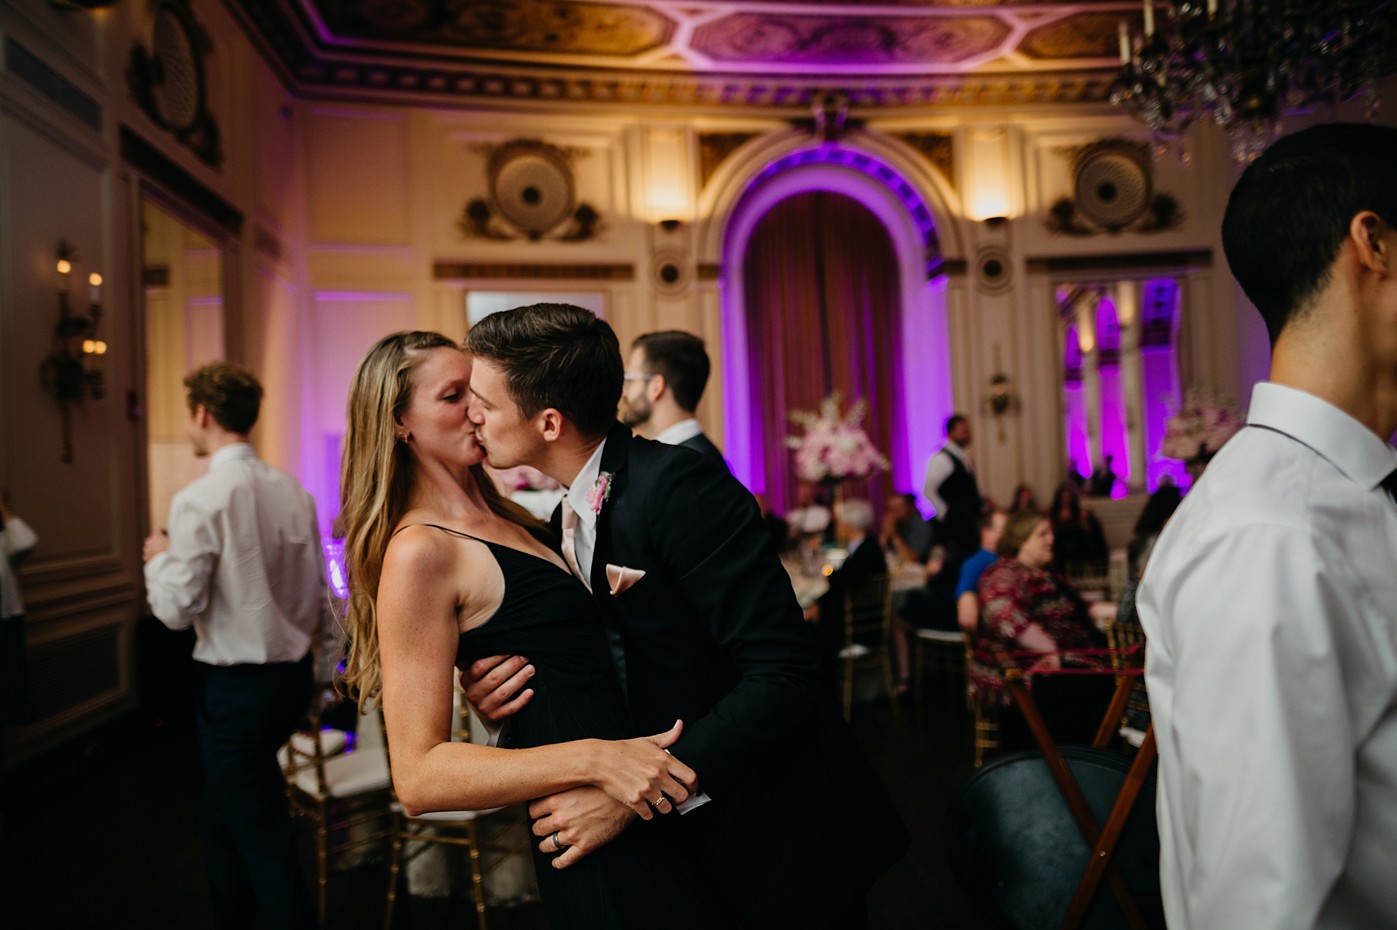 Katie & Curtis's Downtown Detroit Colony Club wedding was a traditional classic and proves just why weddings are so special.